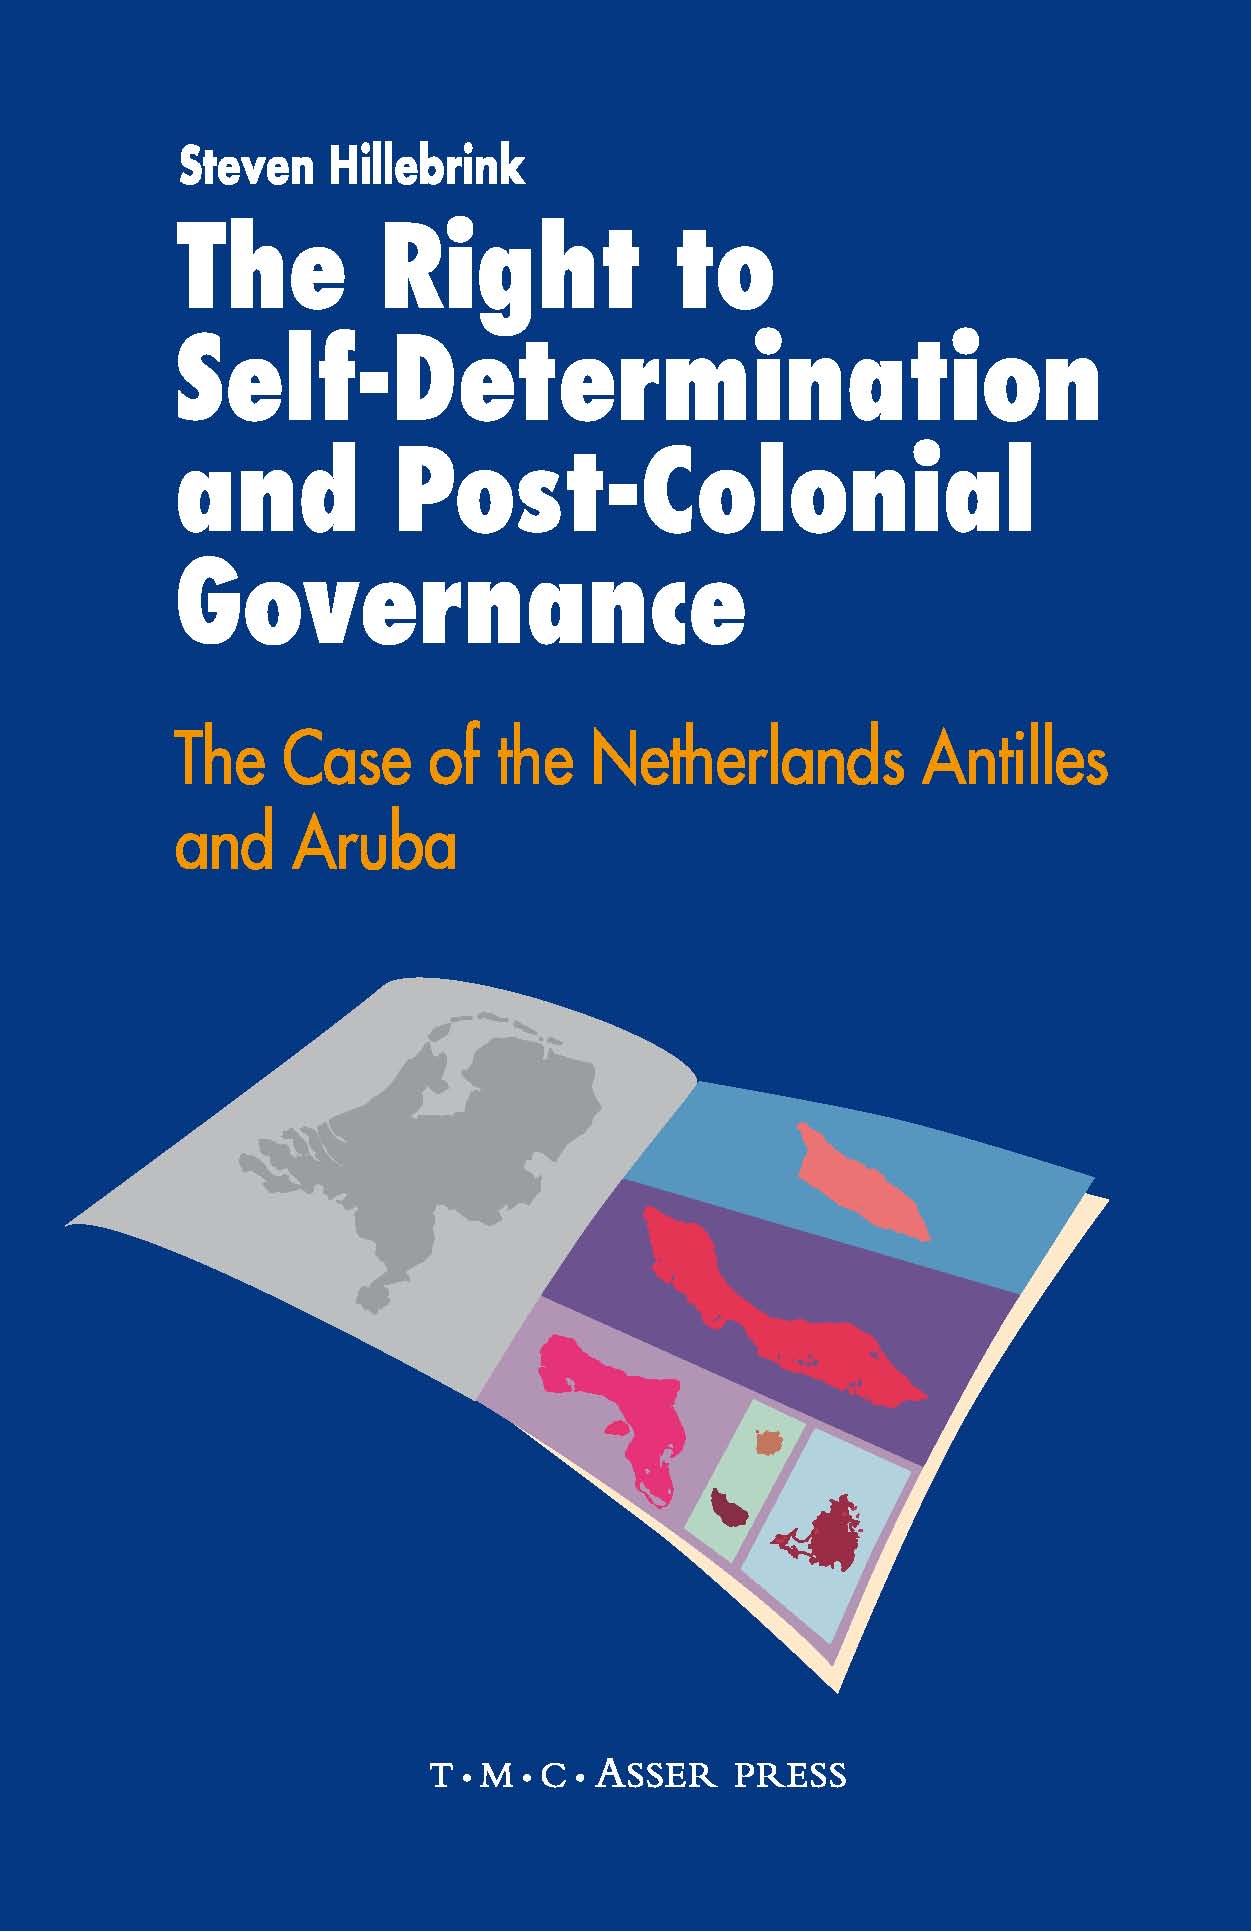 The Right to Self-Determination and Post-Colonial Governance - The Case of the Netherlands Antilles and Aruba